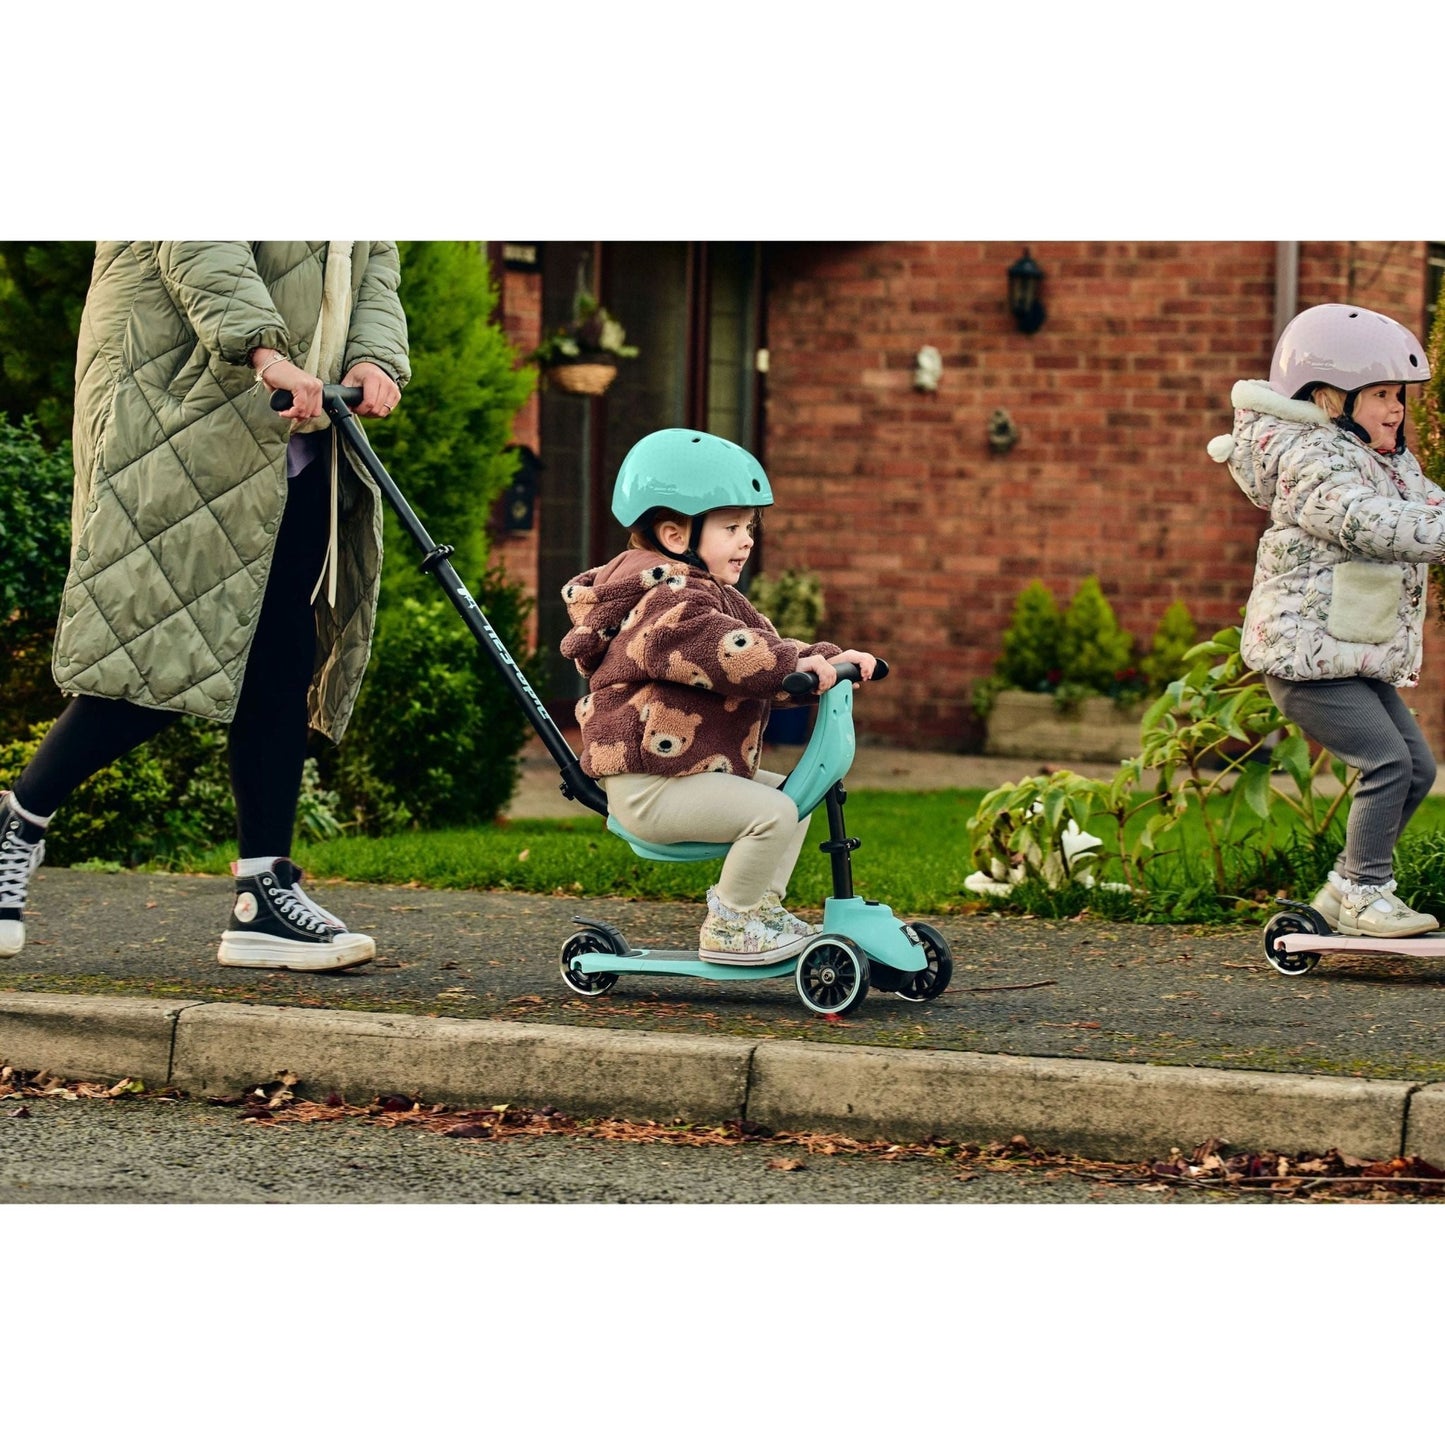 girl sitting on ride ezy kick scooter while wearing Ride-Ezy Hector 48-53cms Kids Helmet - Kingfisher and being pushed by mother